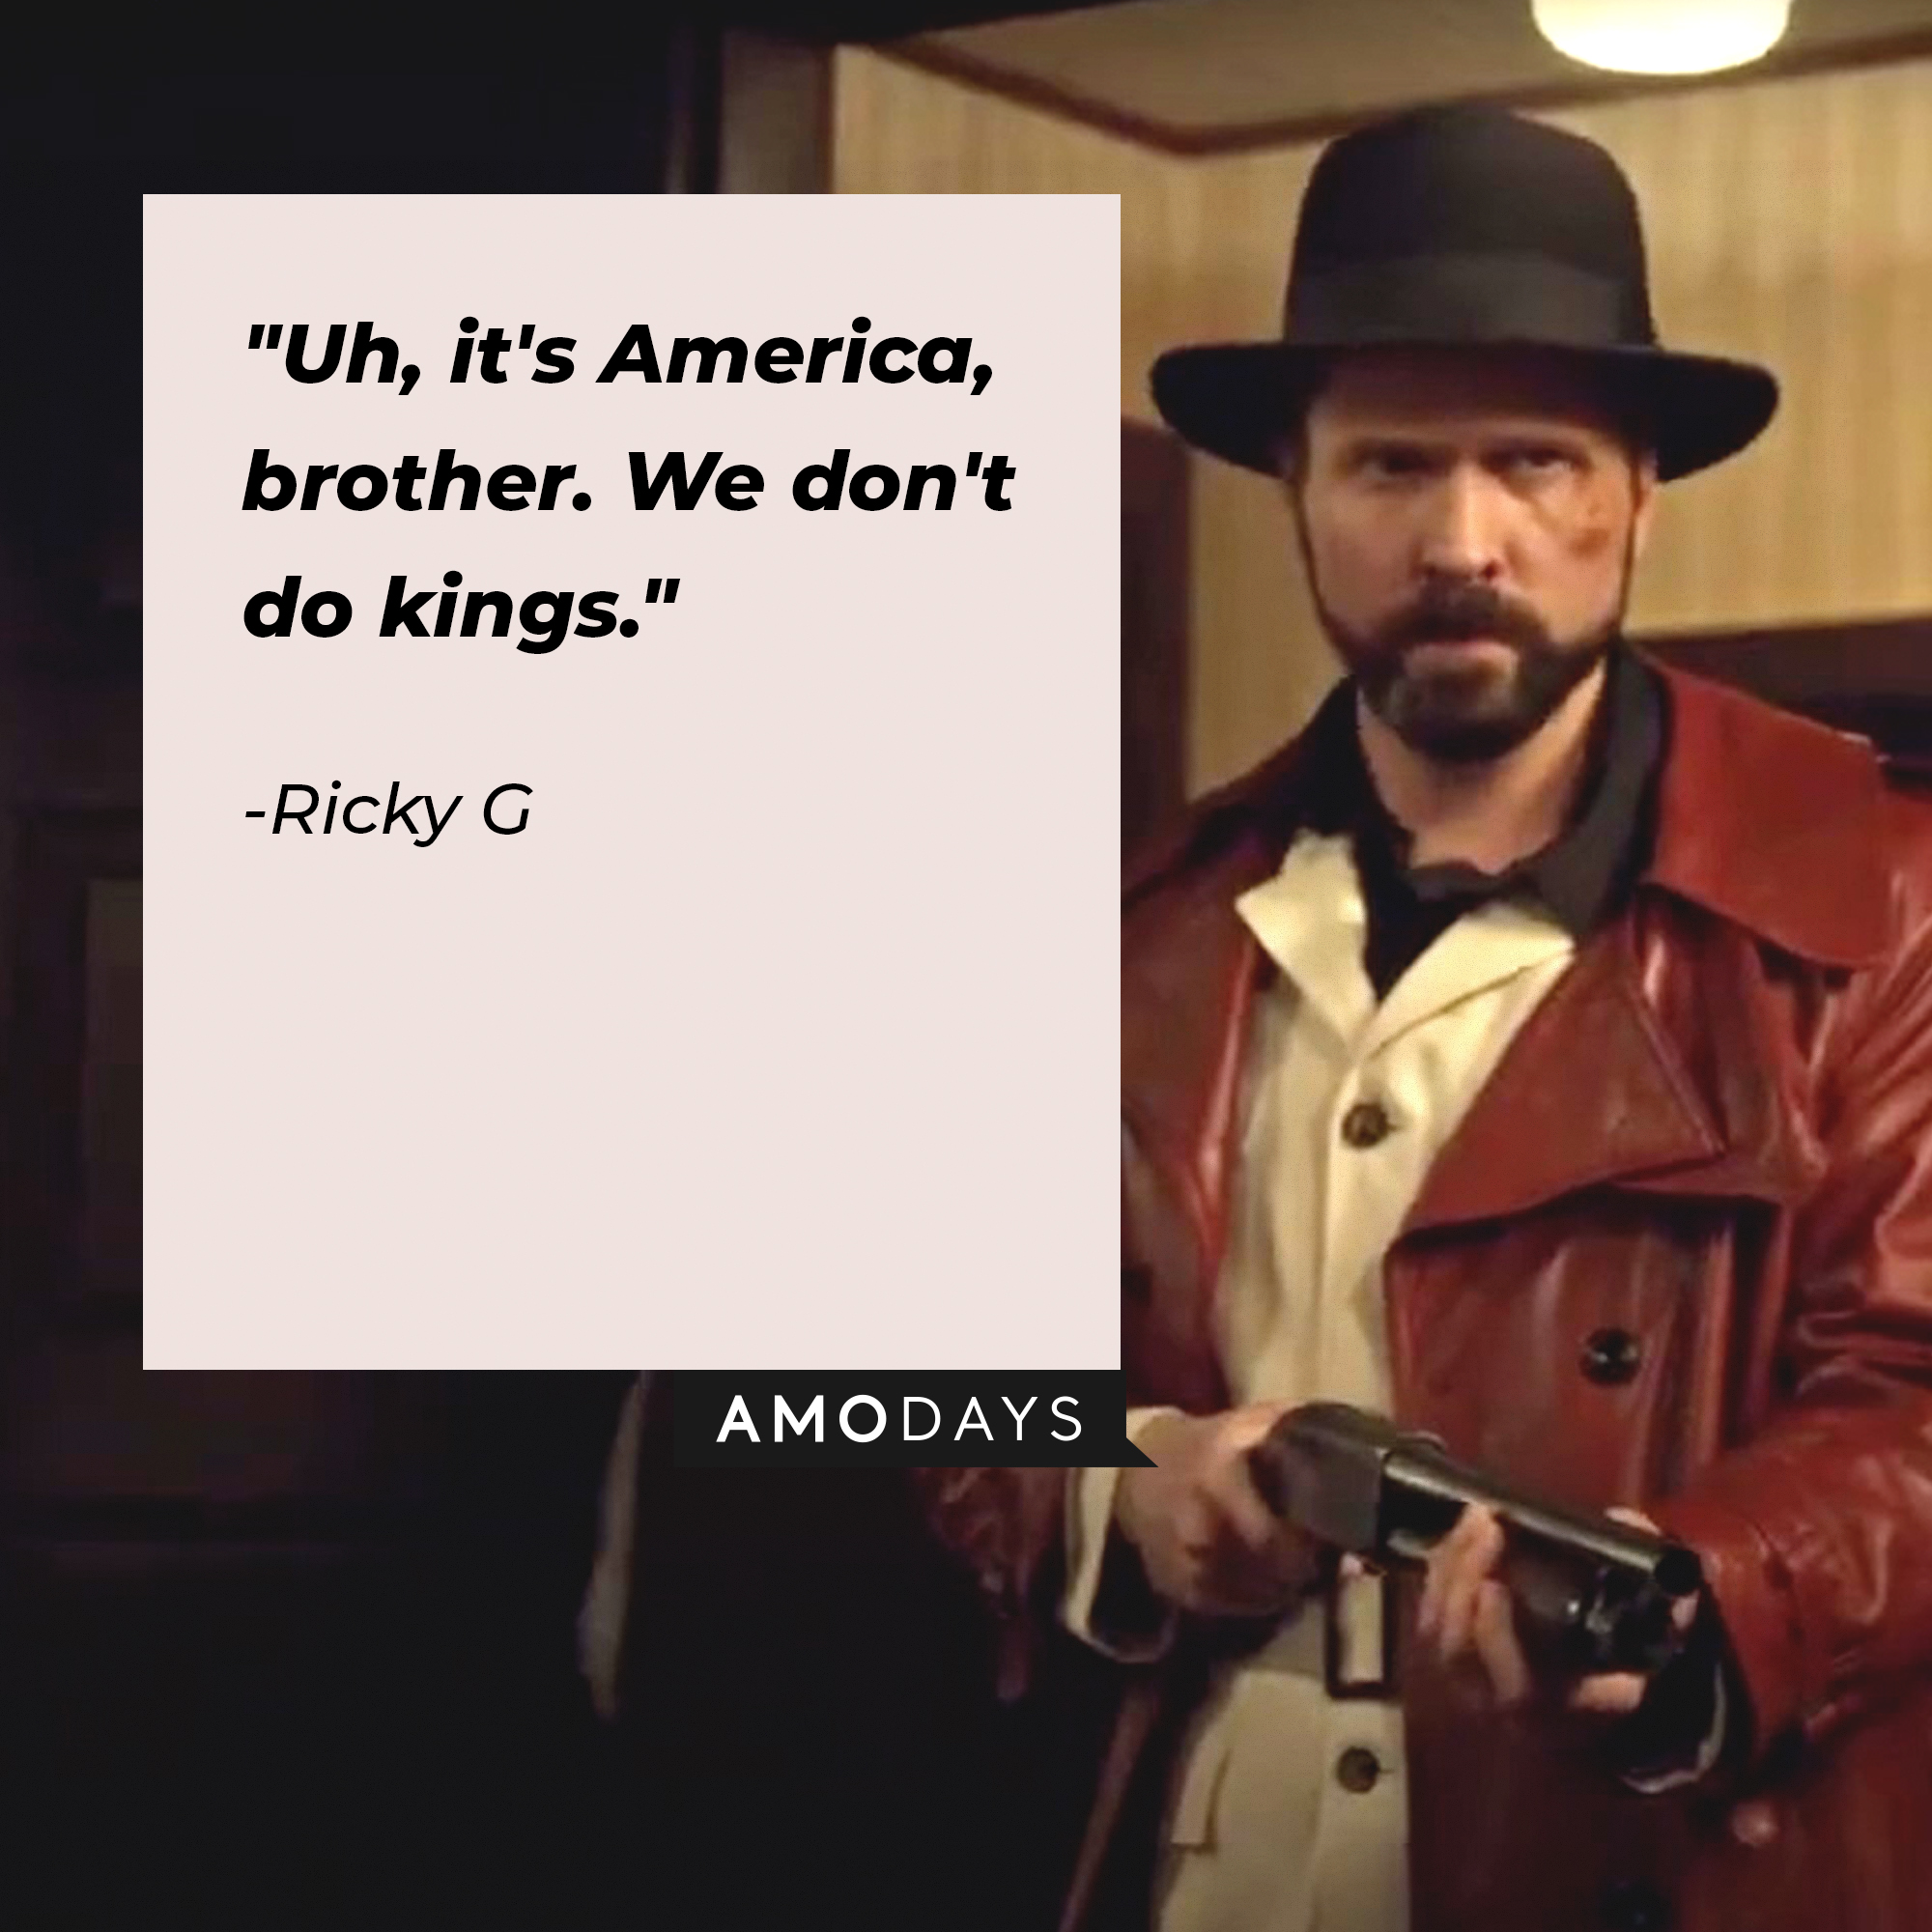 Ricky G, with his quote: “Uh, it's America, brother. We don't do kings.” |Source: youtube.com/Netflix